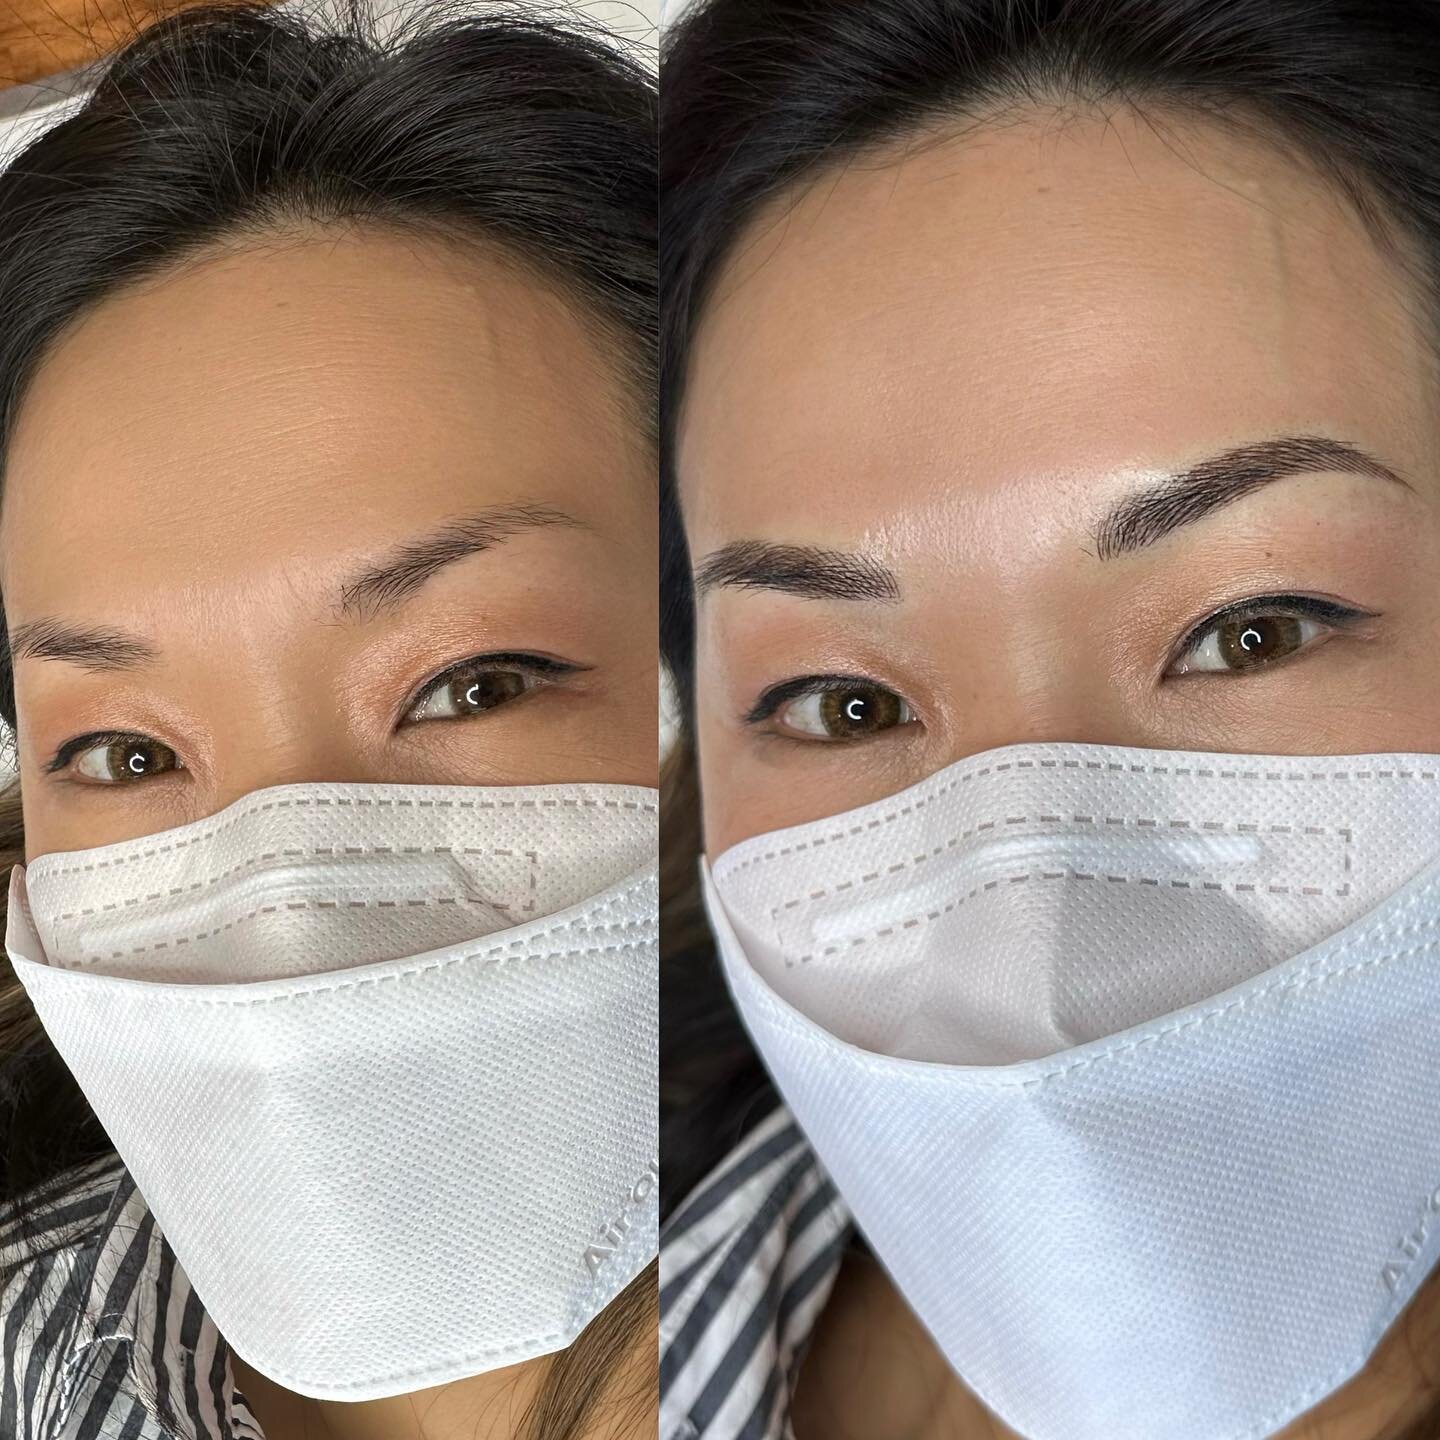 Most common brow problem among a lot of my clients is missing brow hairs at the tail of the brows. A little feathering and the brows are full and defined again 🫶🏼✨
&mdash;
Skin type: Dry
Technique: Nano Feather Brows
Pain level: None
Appointment ti